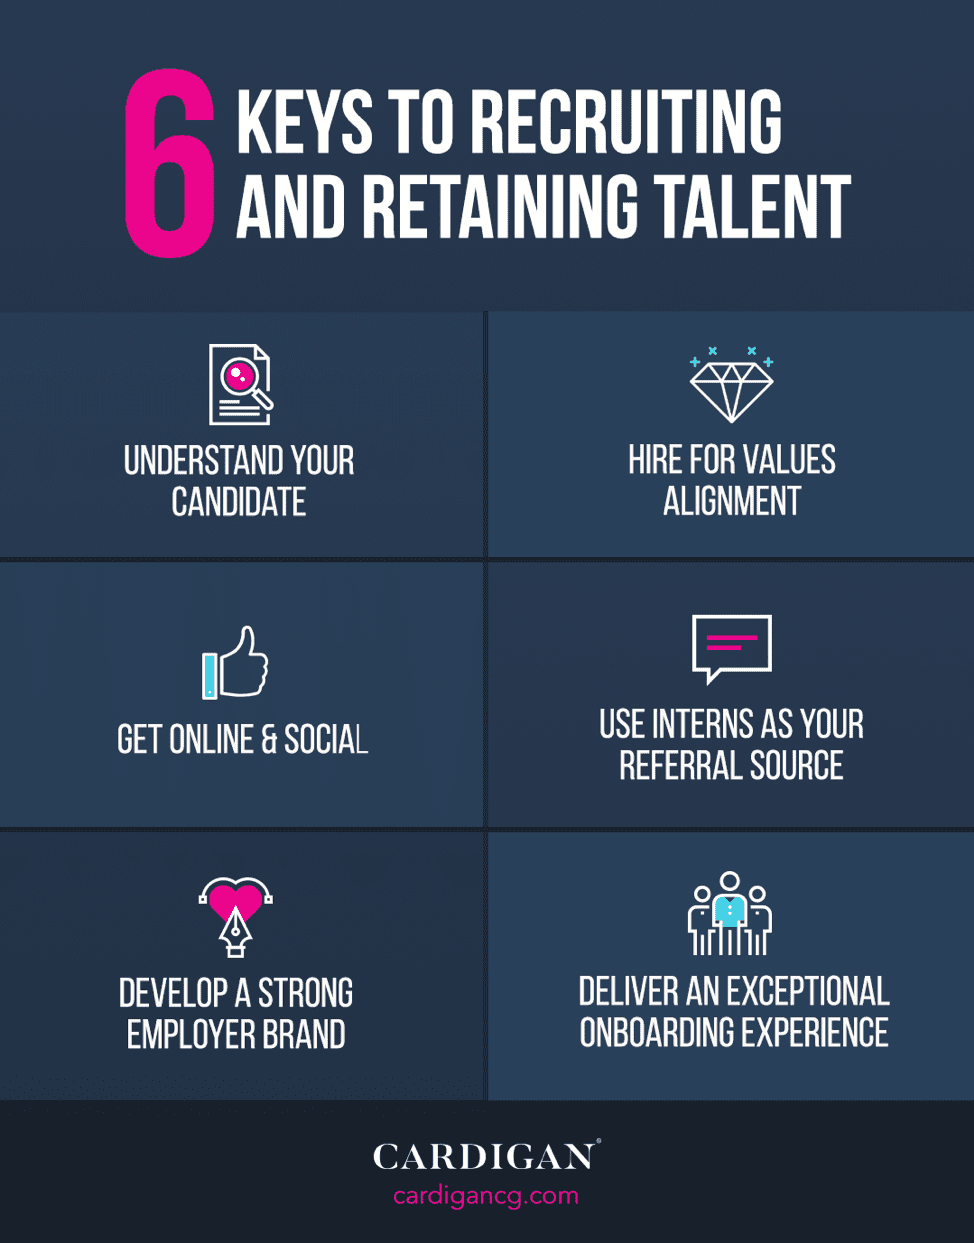 Employer Branding and Onboarding: Keys to Recruiting and Retaining Top Millennial Talent in Power Generation